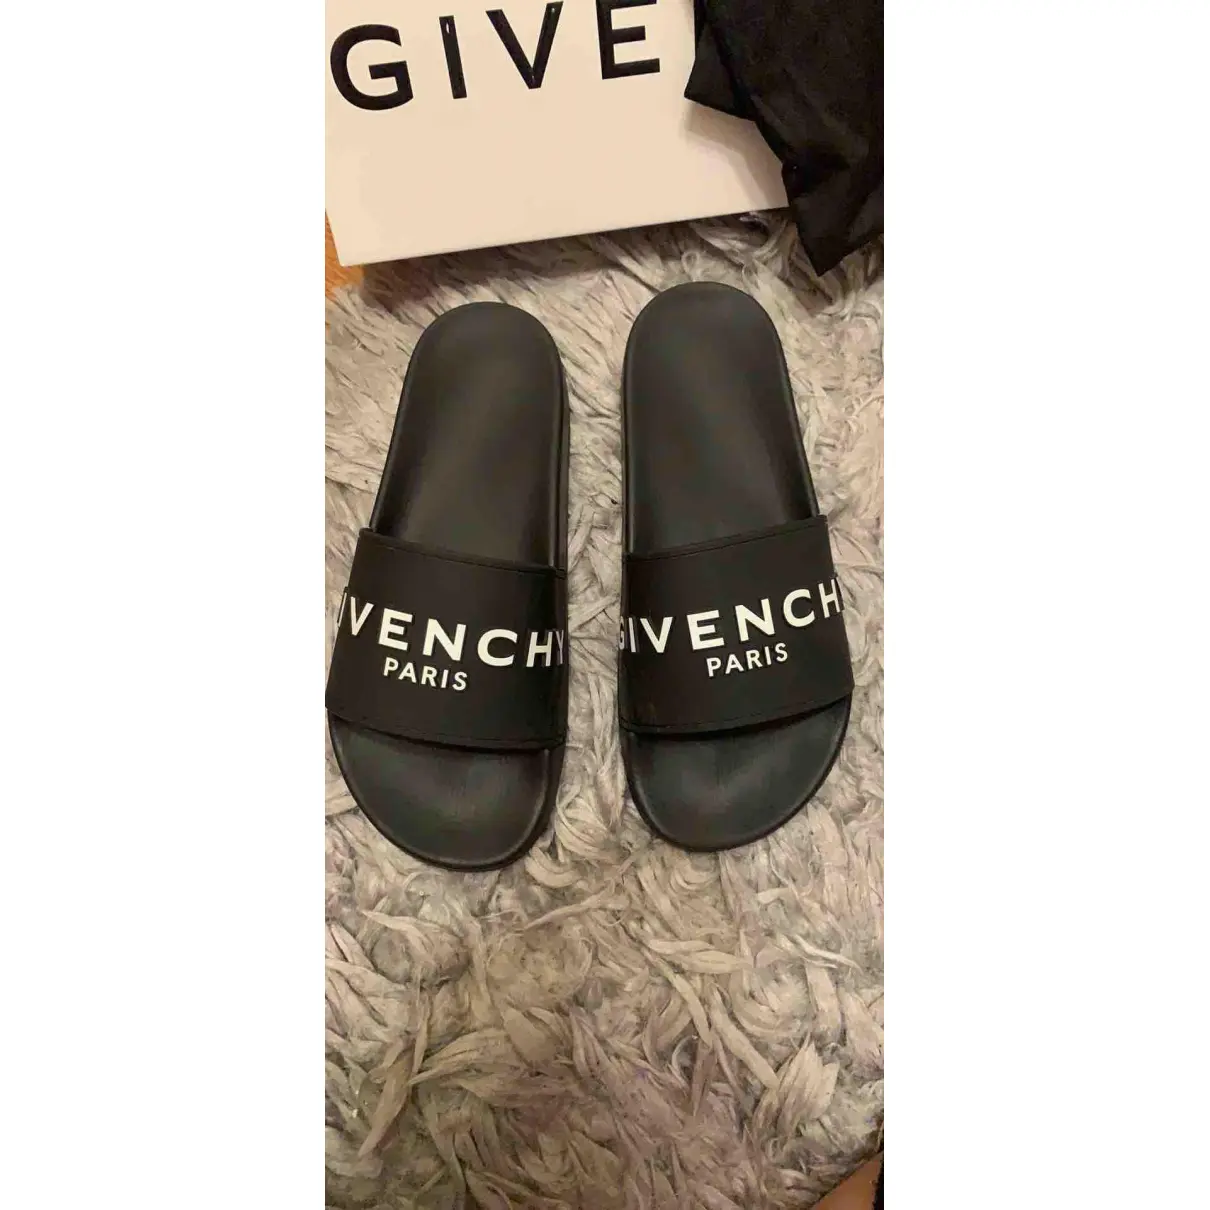 Buy Givenchy Leather flats online